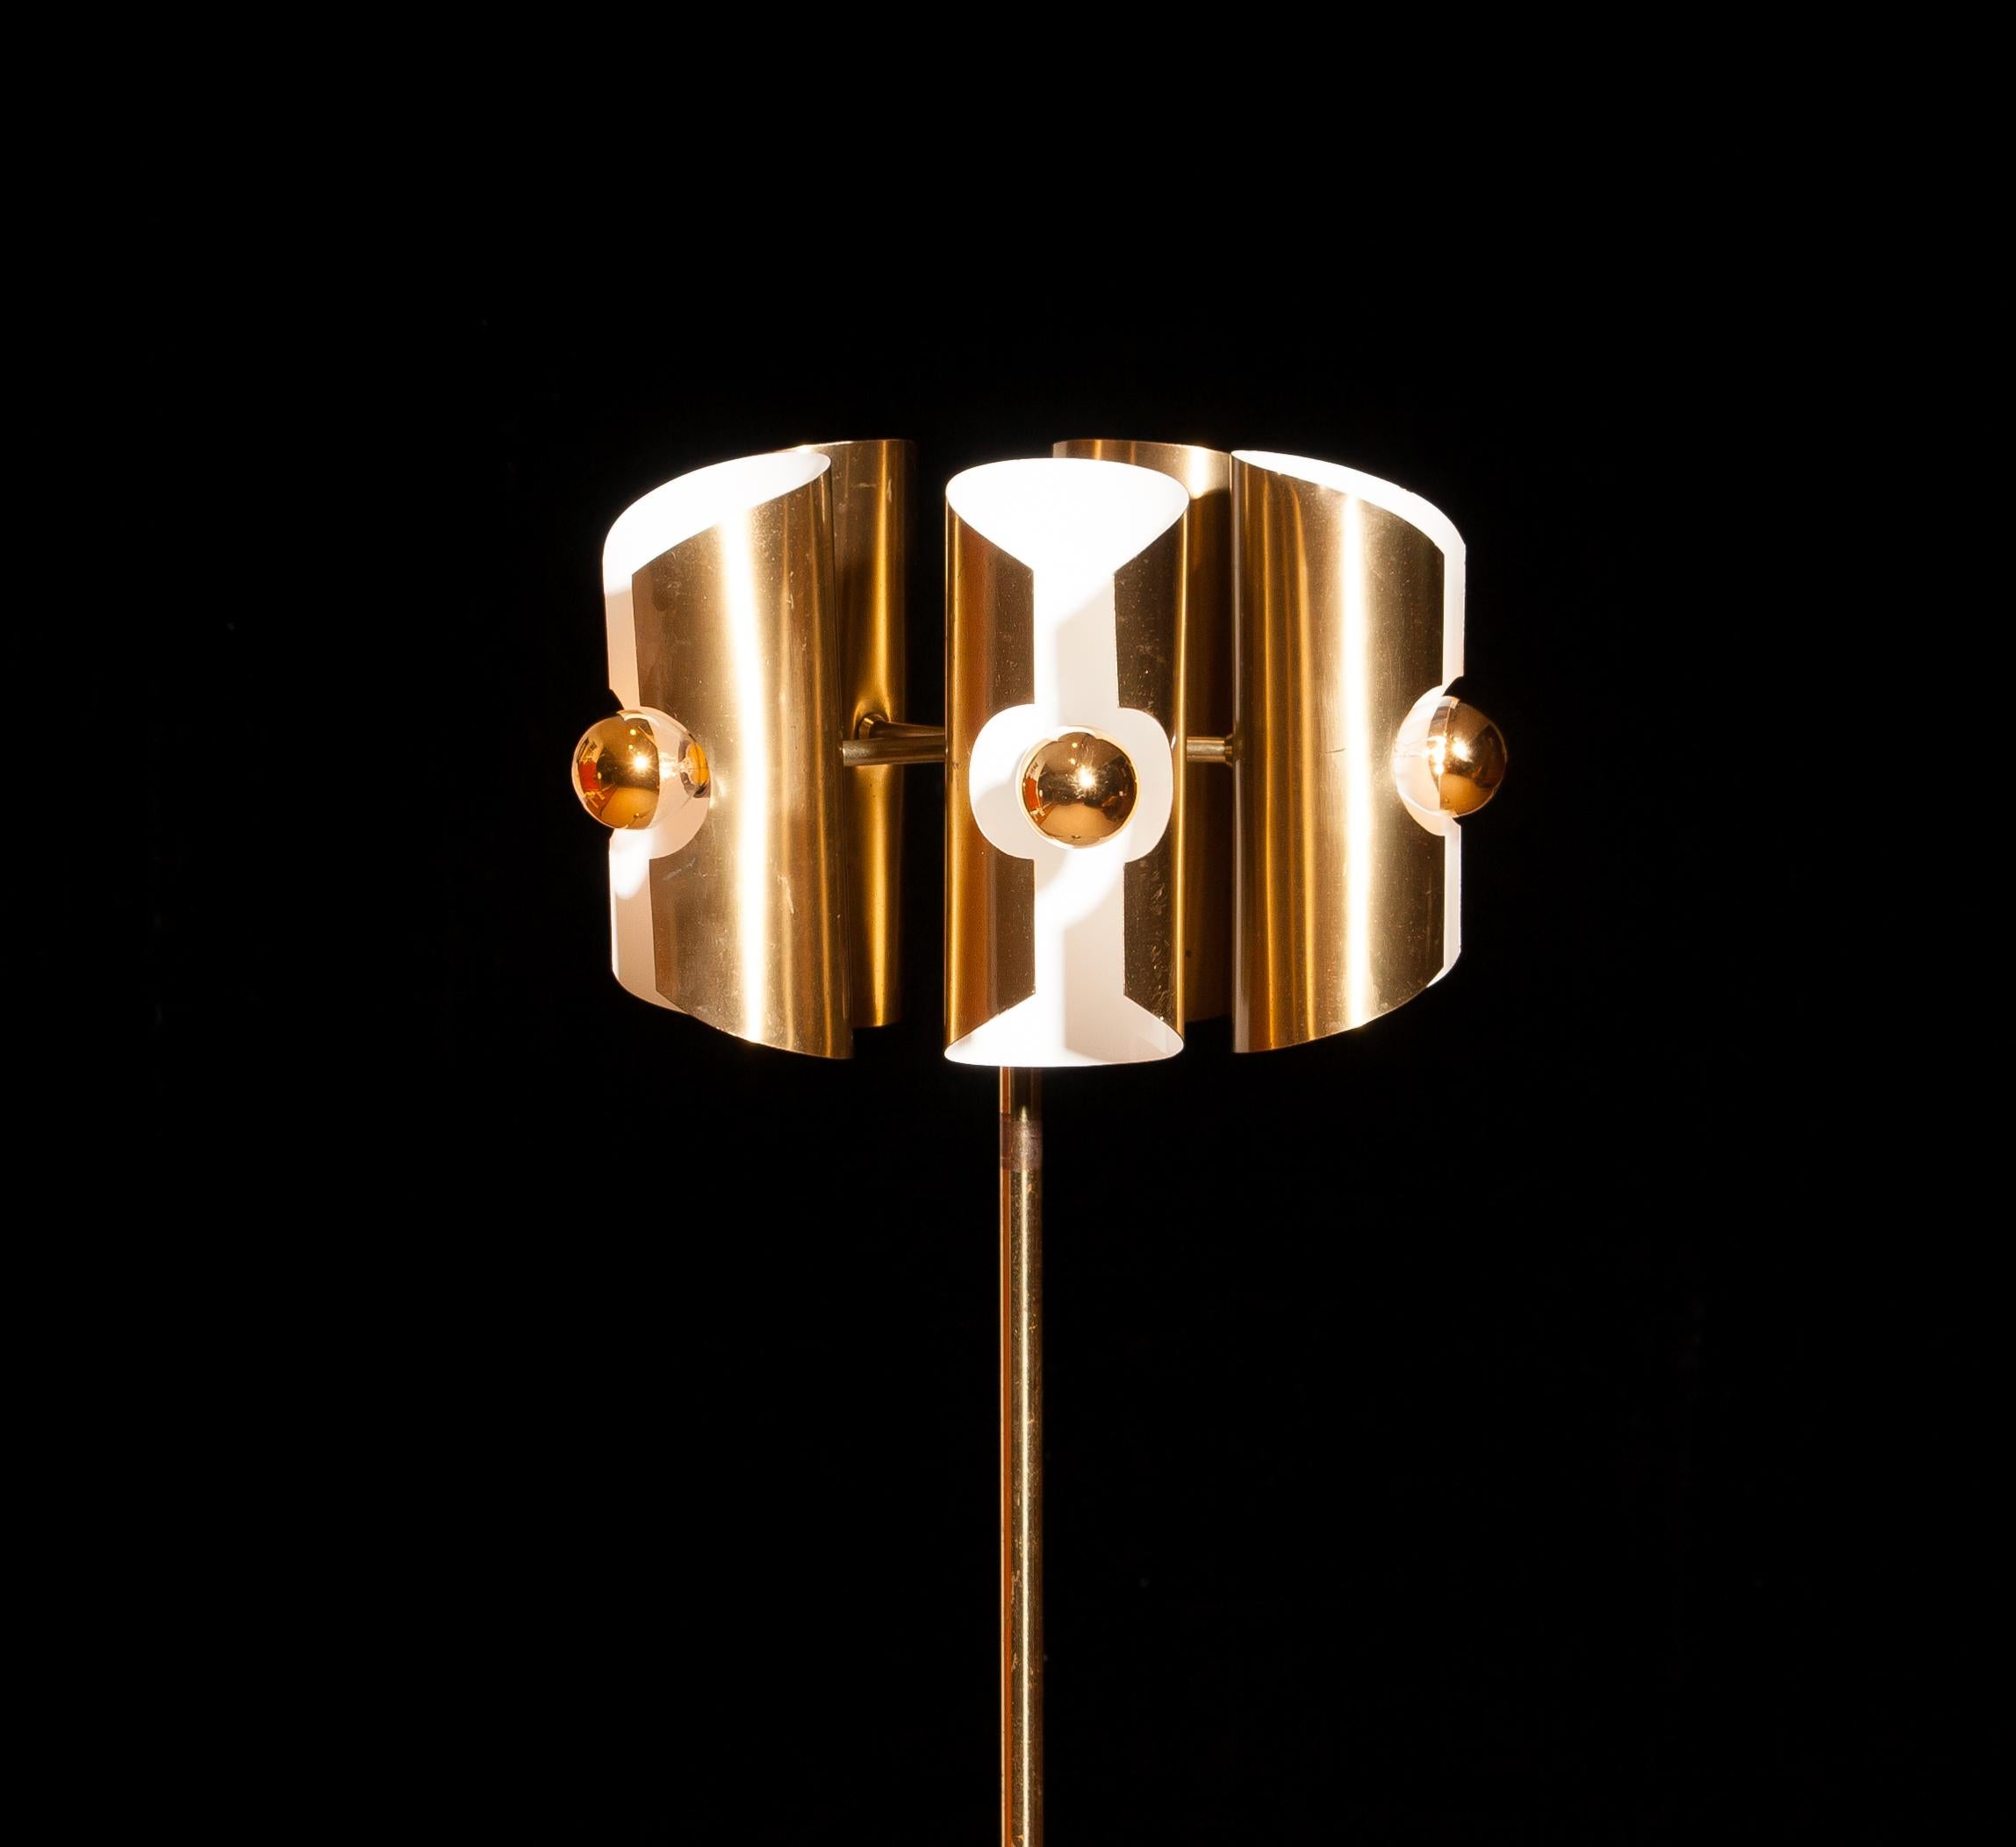 Beautiful 1960 Italian floor lamp in brass. 
The shades are fixed and made of brushed brass. 
The shades are height 21 cm. and ø 9 cm. 
Inside the shades are white lacquered for proper reflection.
The floor lamp has traces of rust, dents and